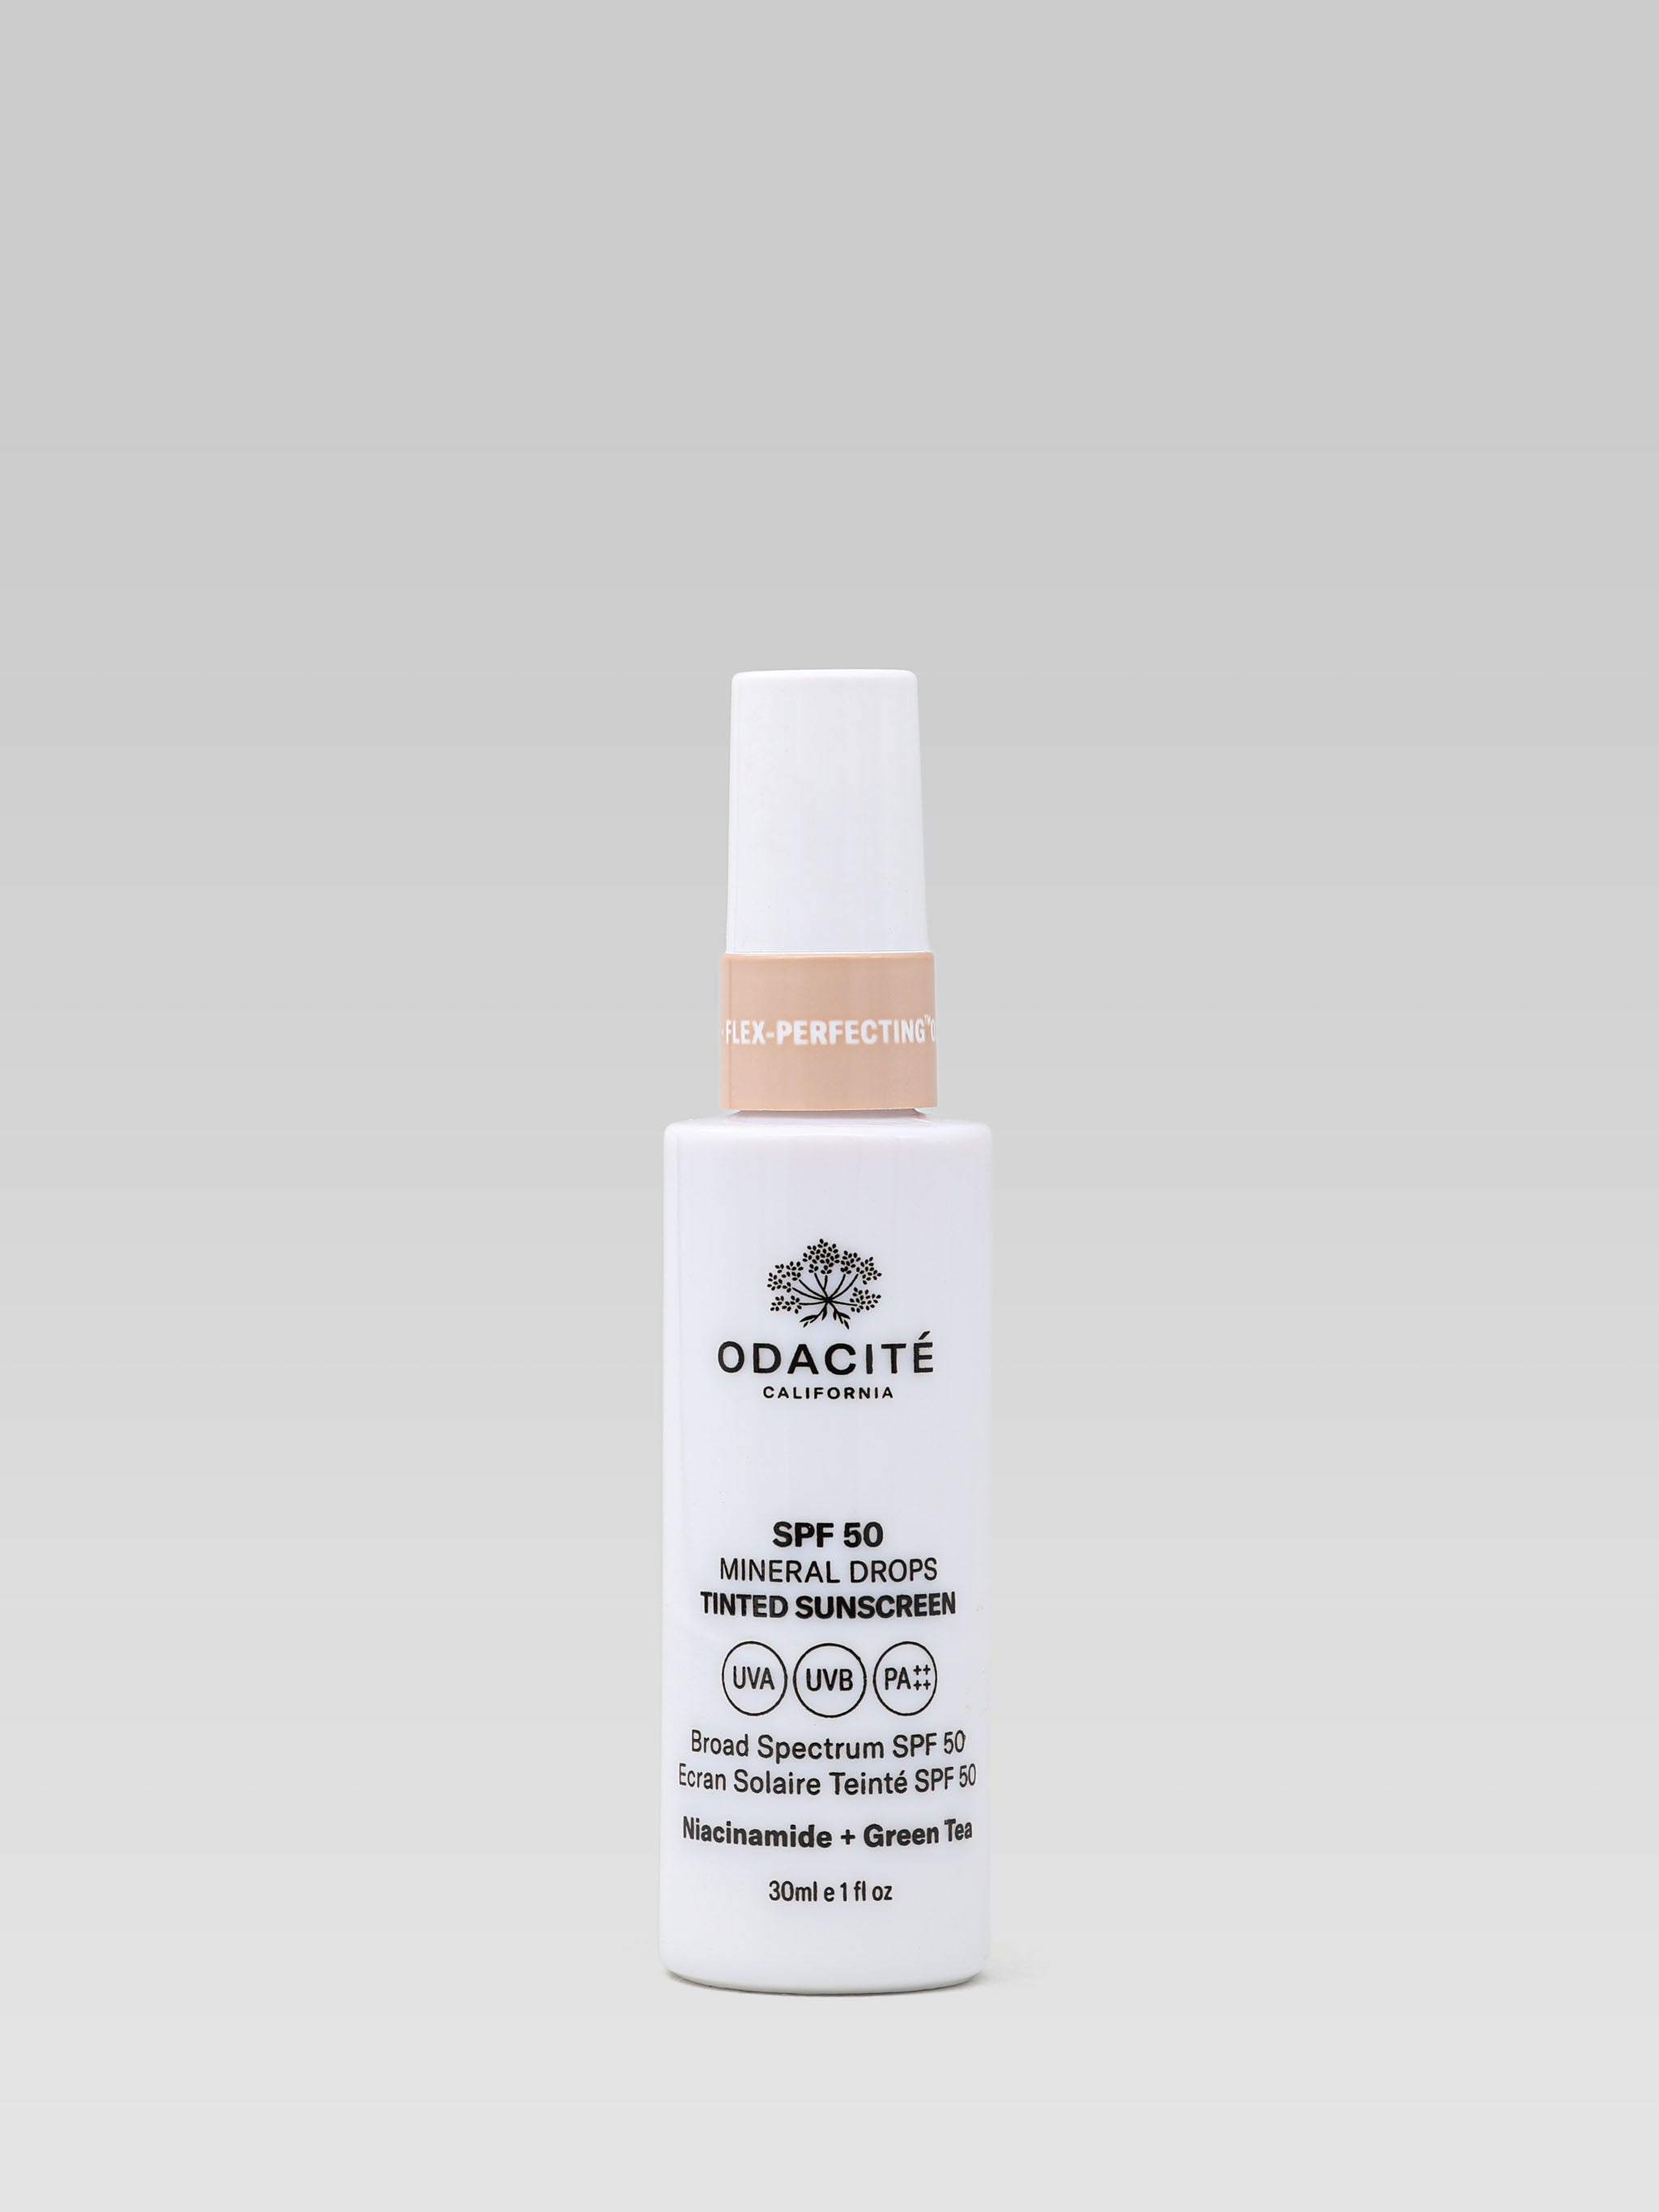 Odacite Tinted Sunscreen Mineral Drops SPF 50 product shot 